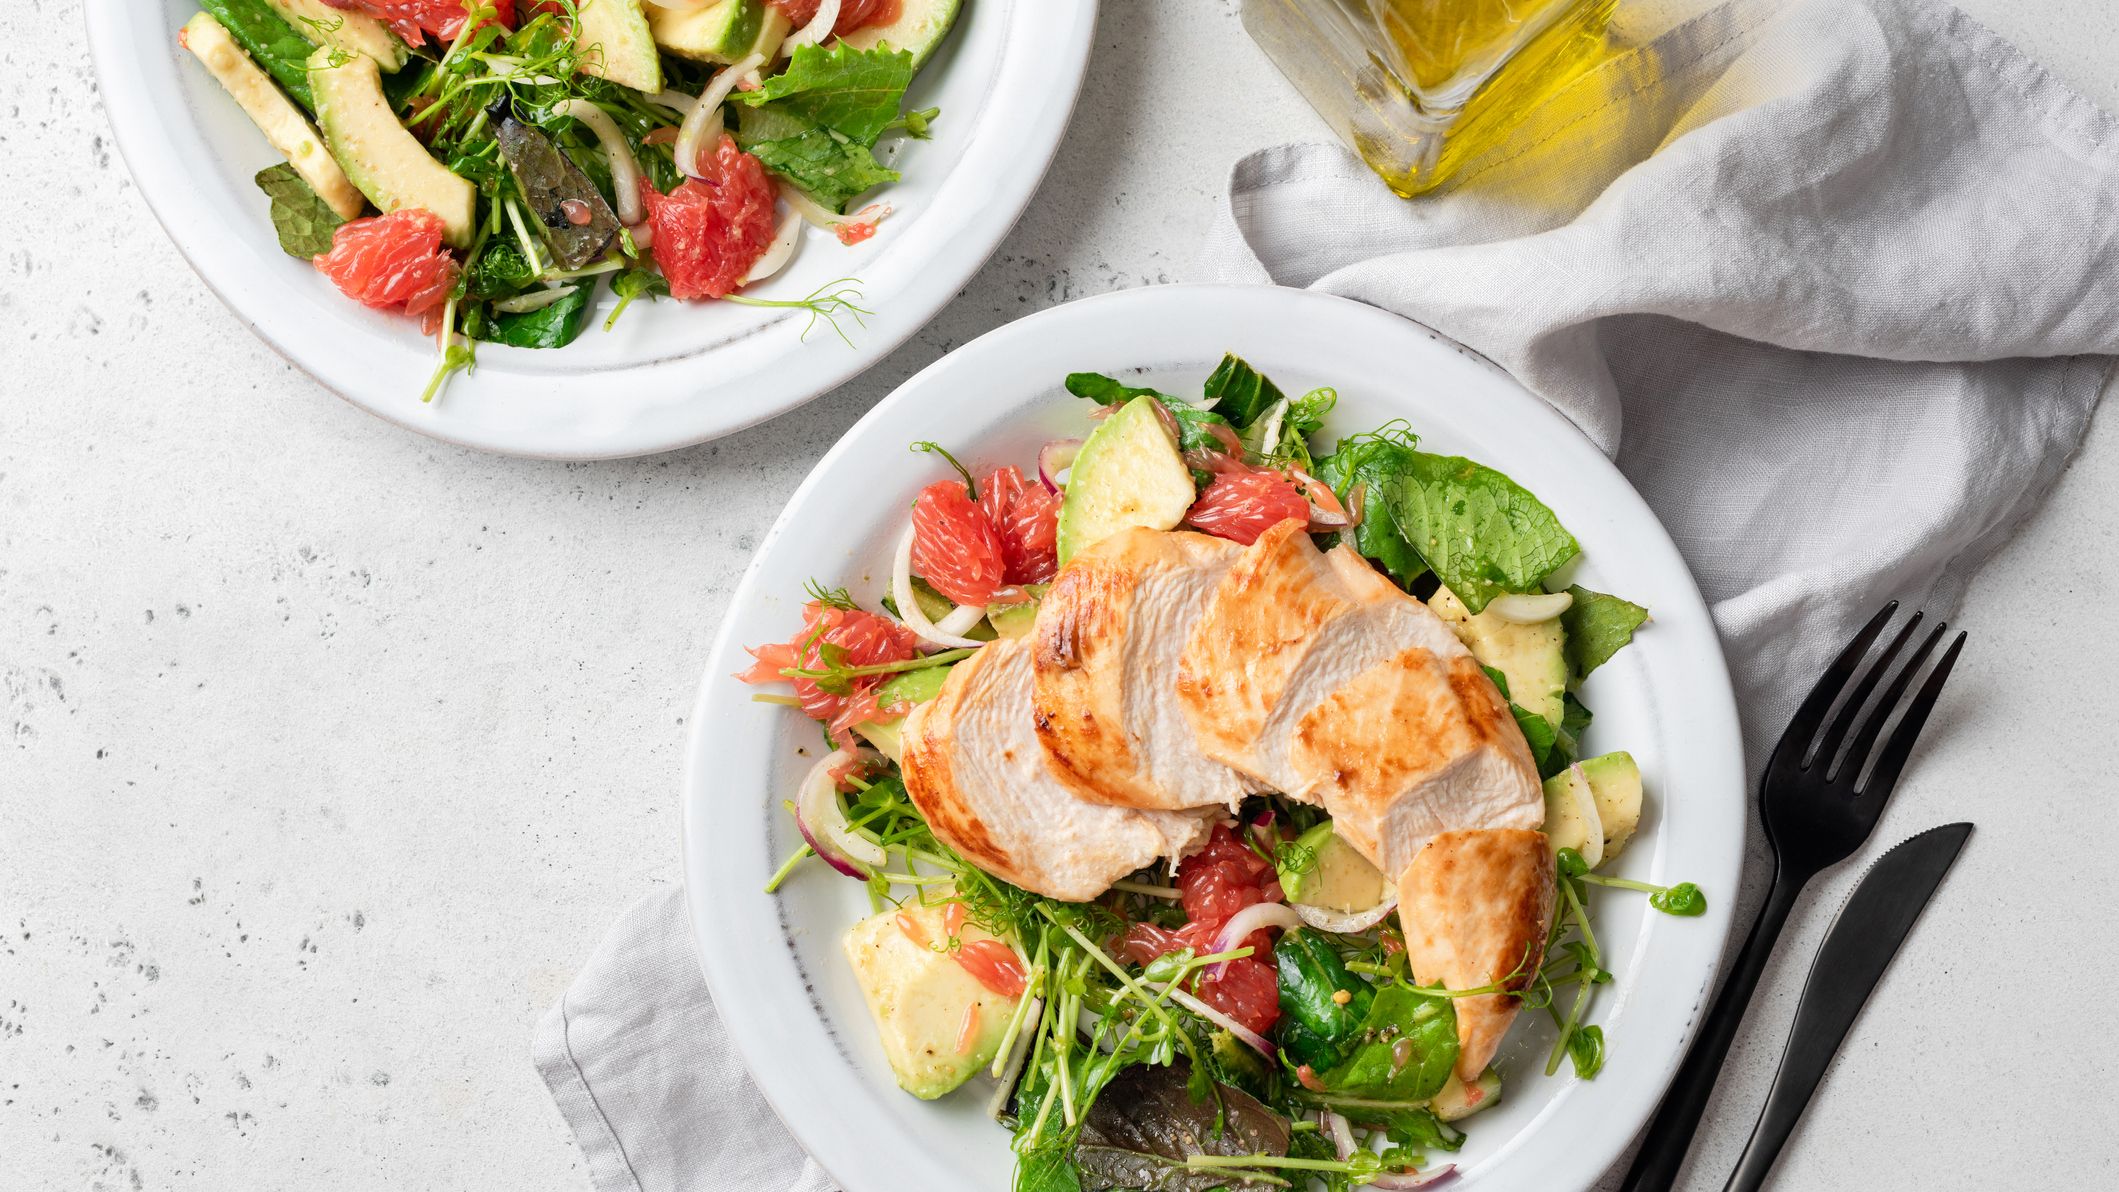 https://hips.hearstapps.com/hmg-prod/images/grilled-chicken-salad-with-avocado-royalty-free-image-1636121417.jpg?crop=1xw:0.84296xh;center,top